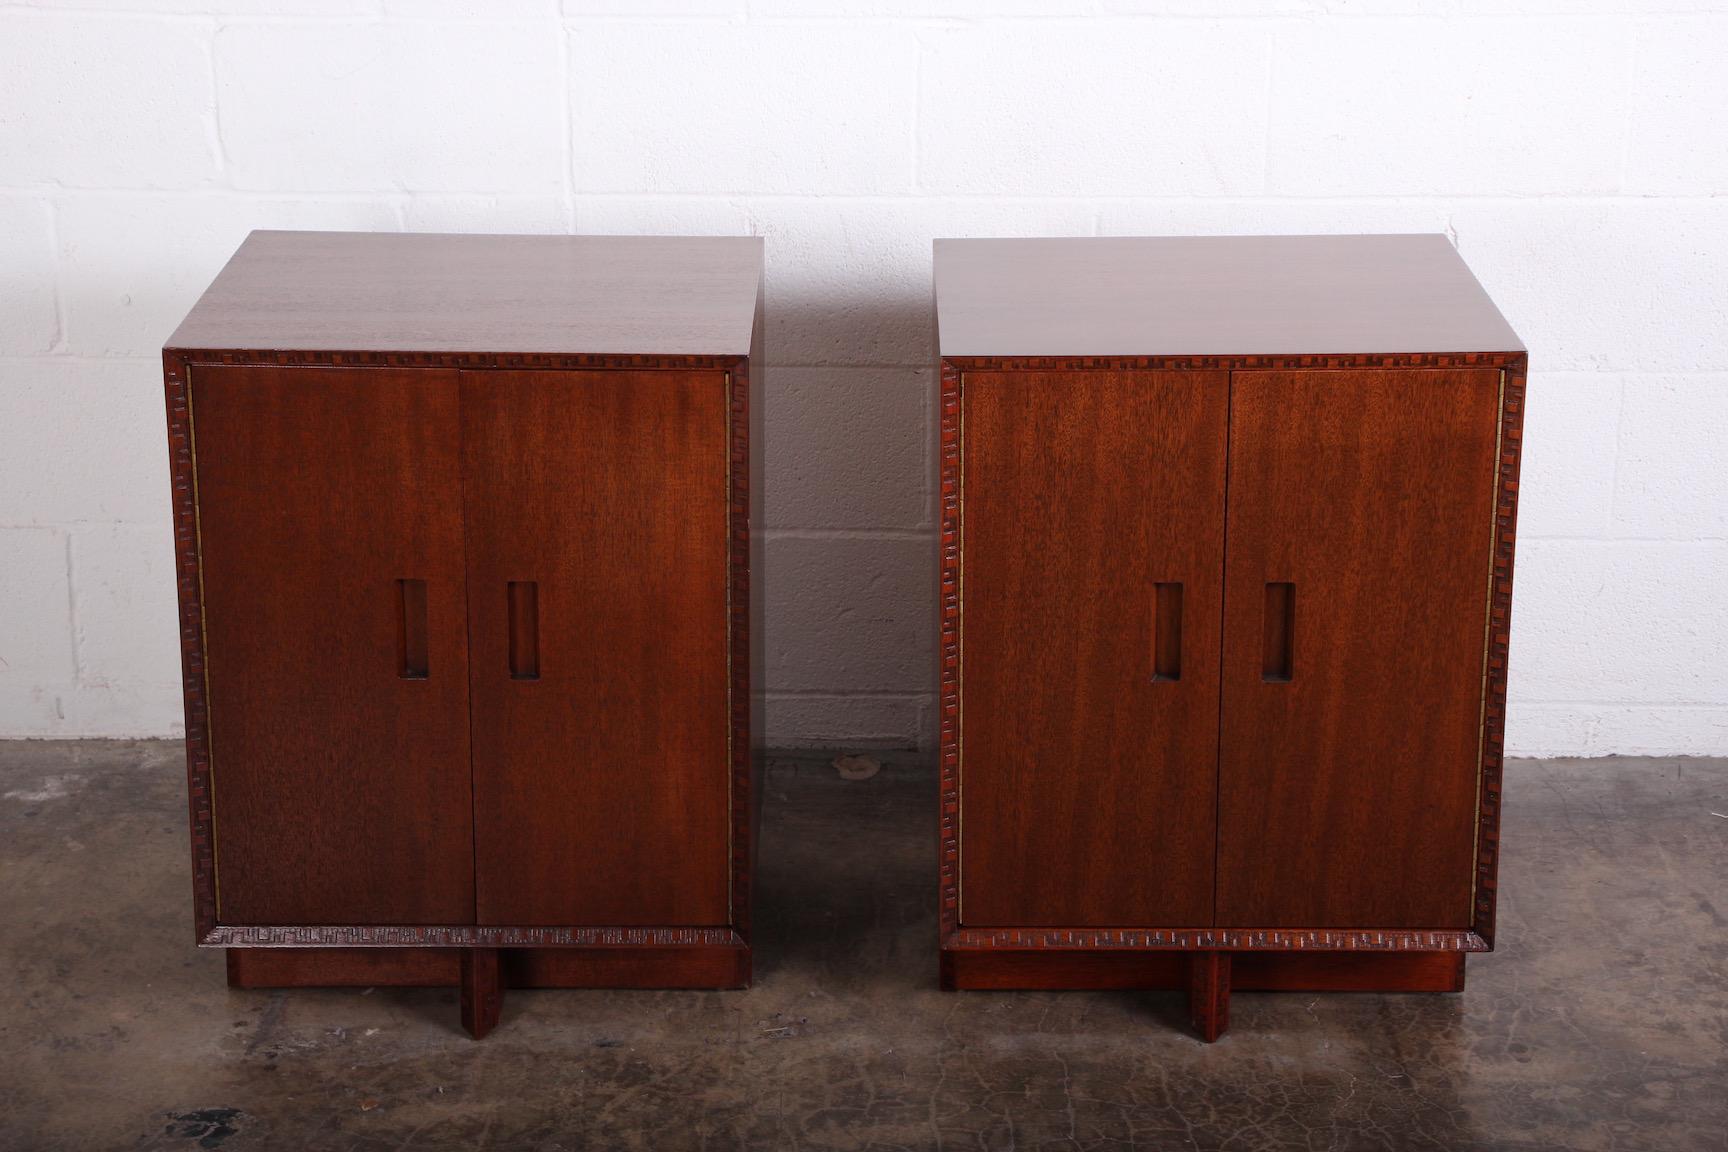 A pair of mahogany cabinets / nightstands by Frank Lloyd Wright for Henredon.